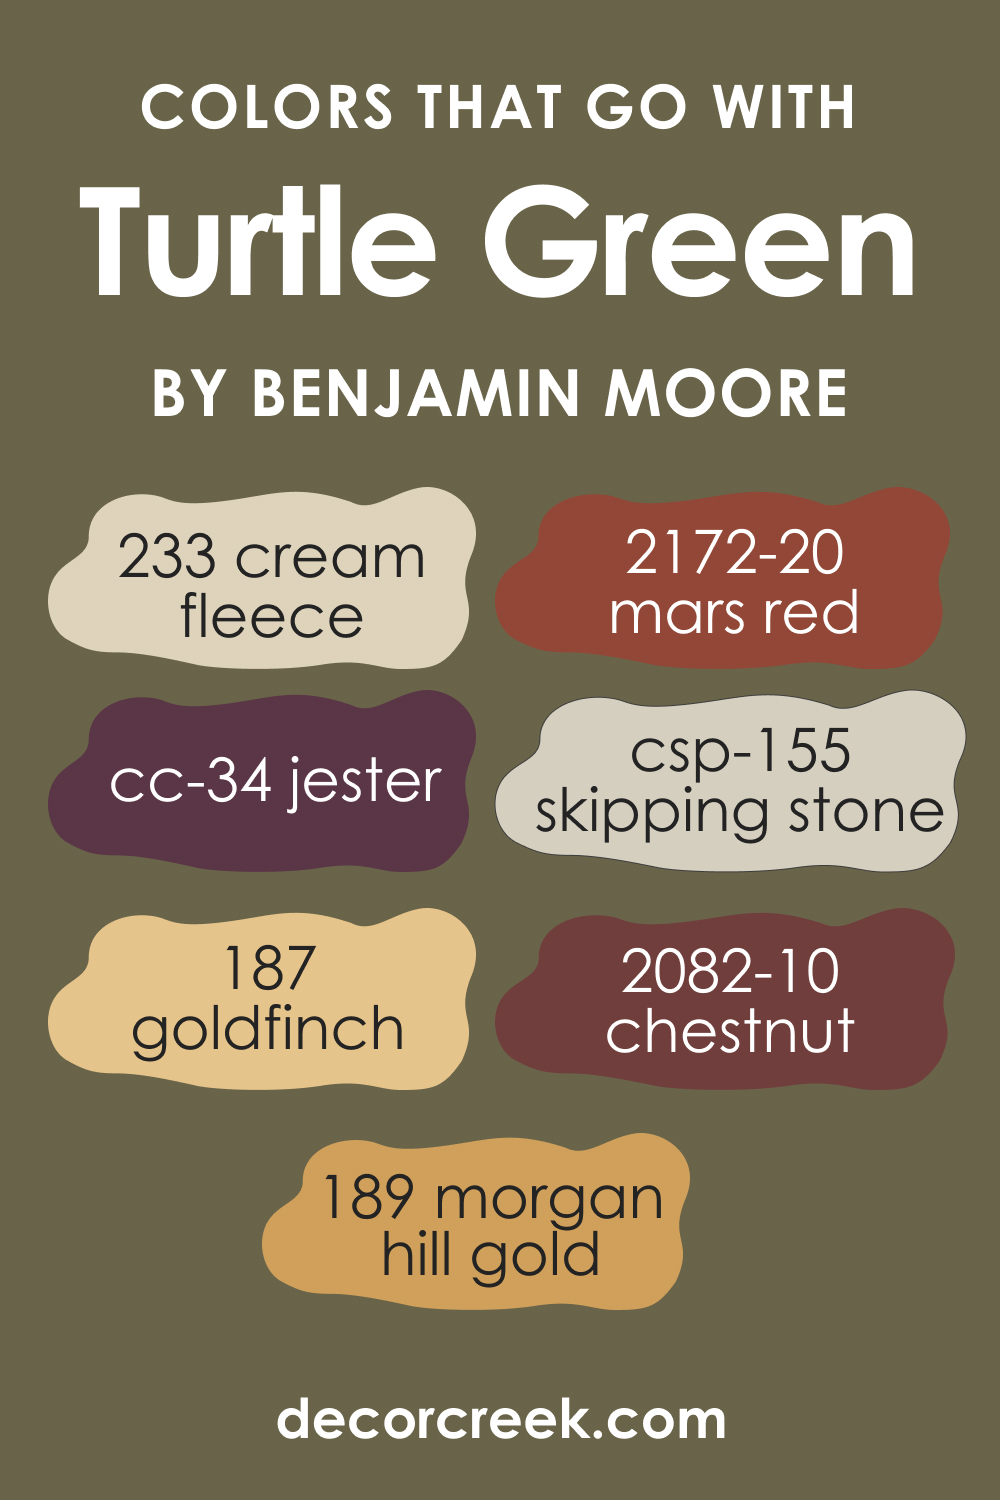 Colors That Go With Turtle Green 2142-20